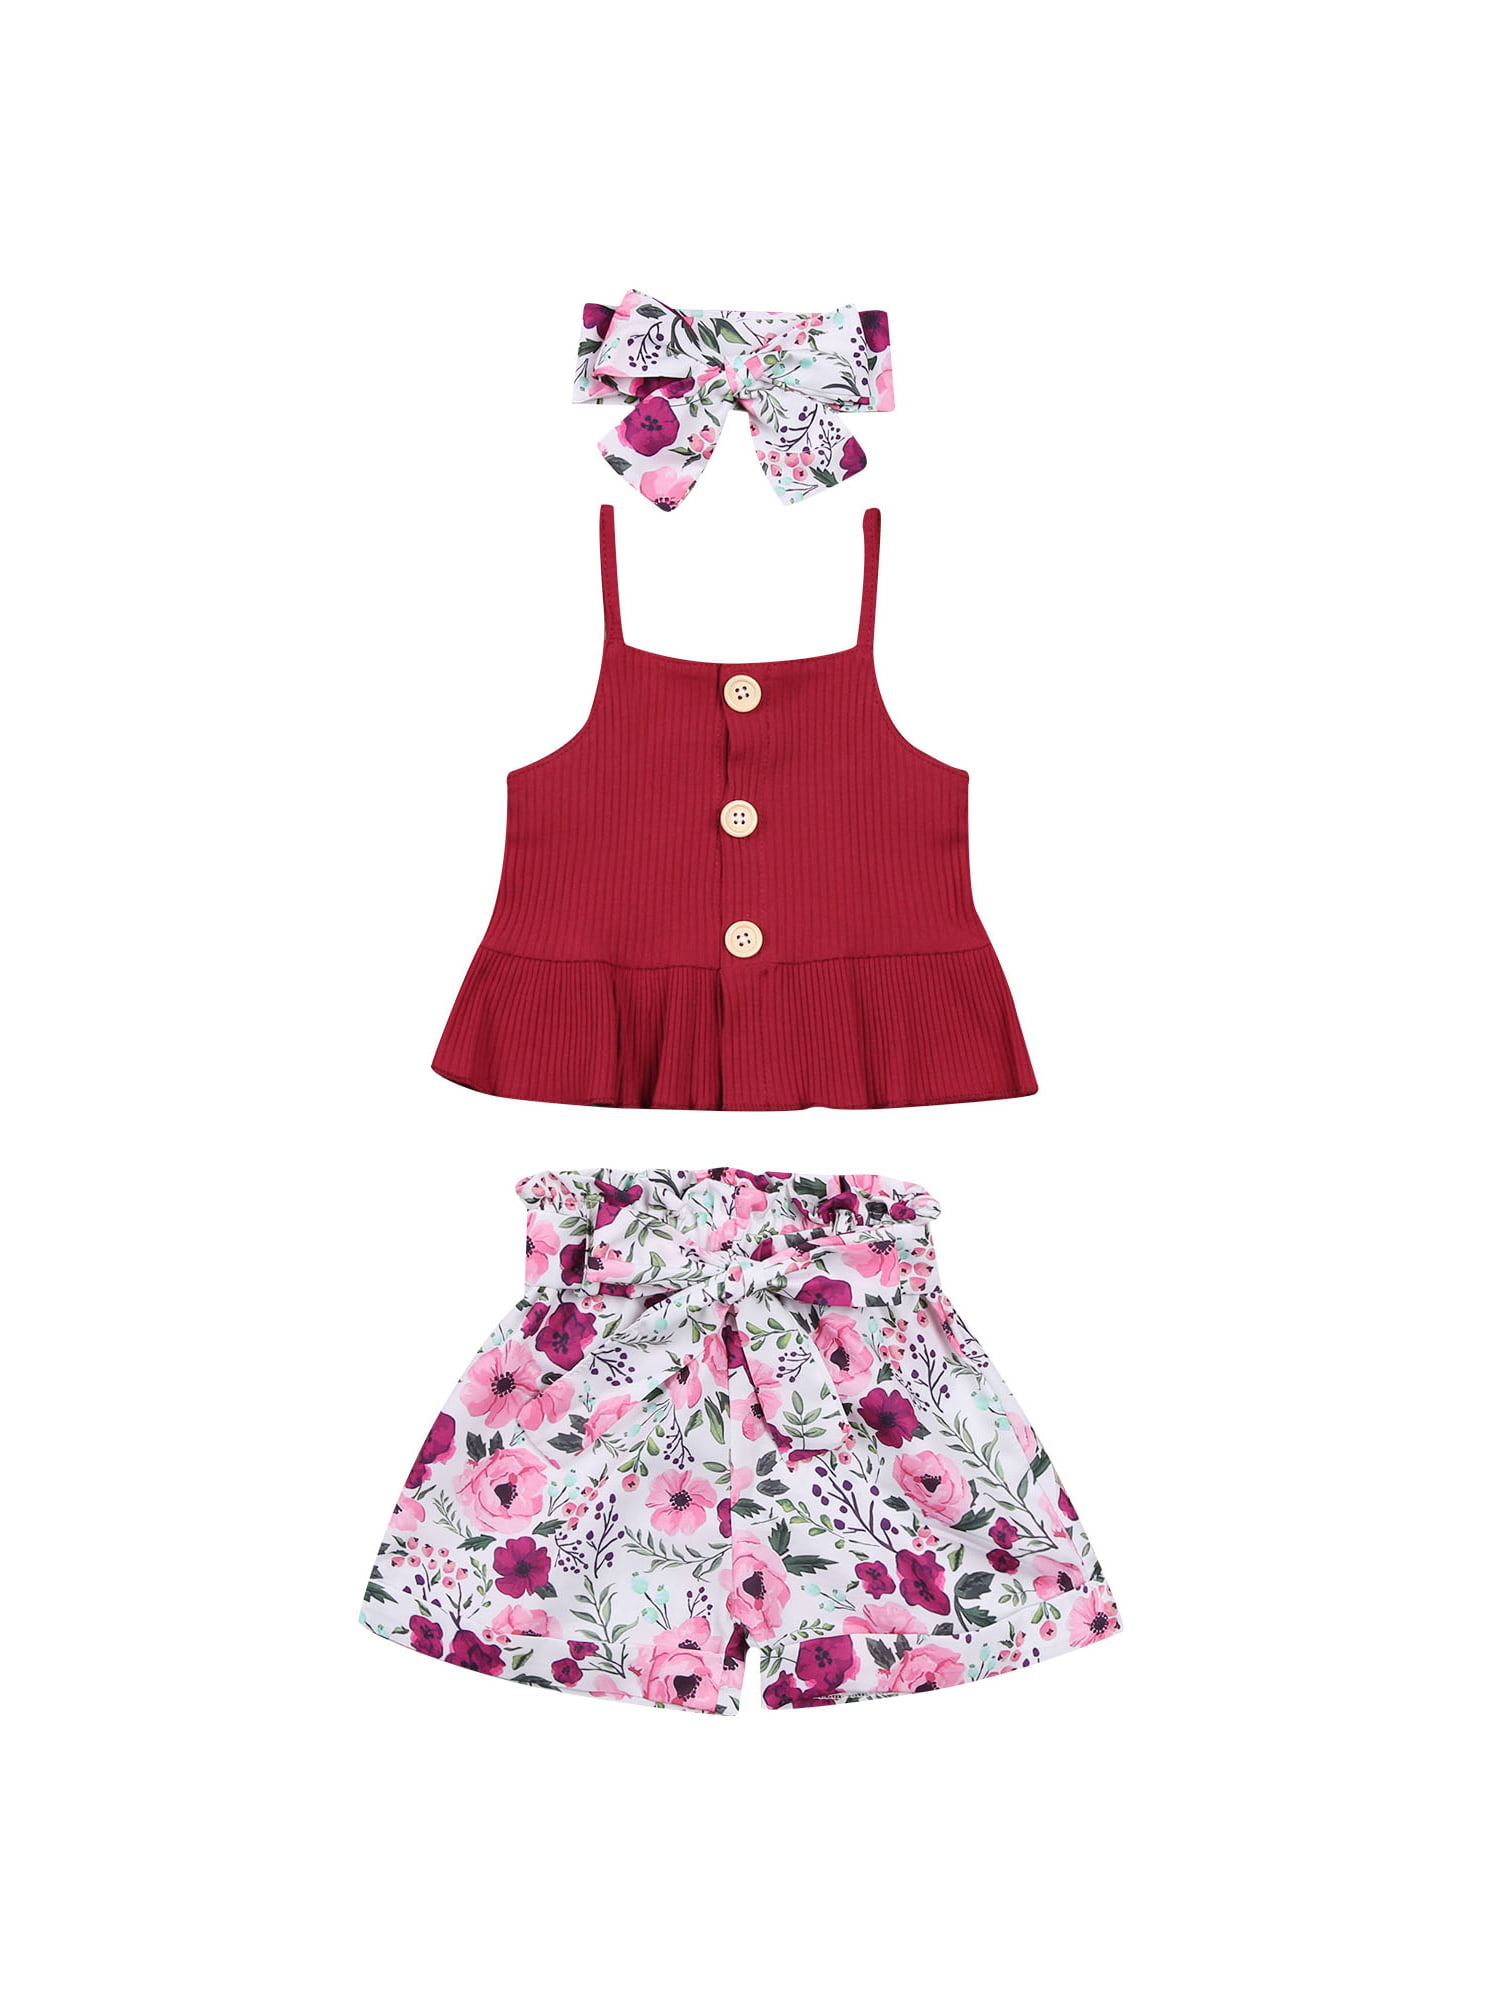 Details about   NEW Boutique Girls Pink Ruffle Tunic Dress Floral Leggings Headband Outfit Set 